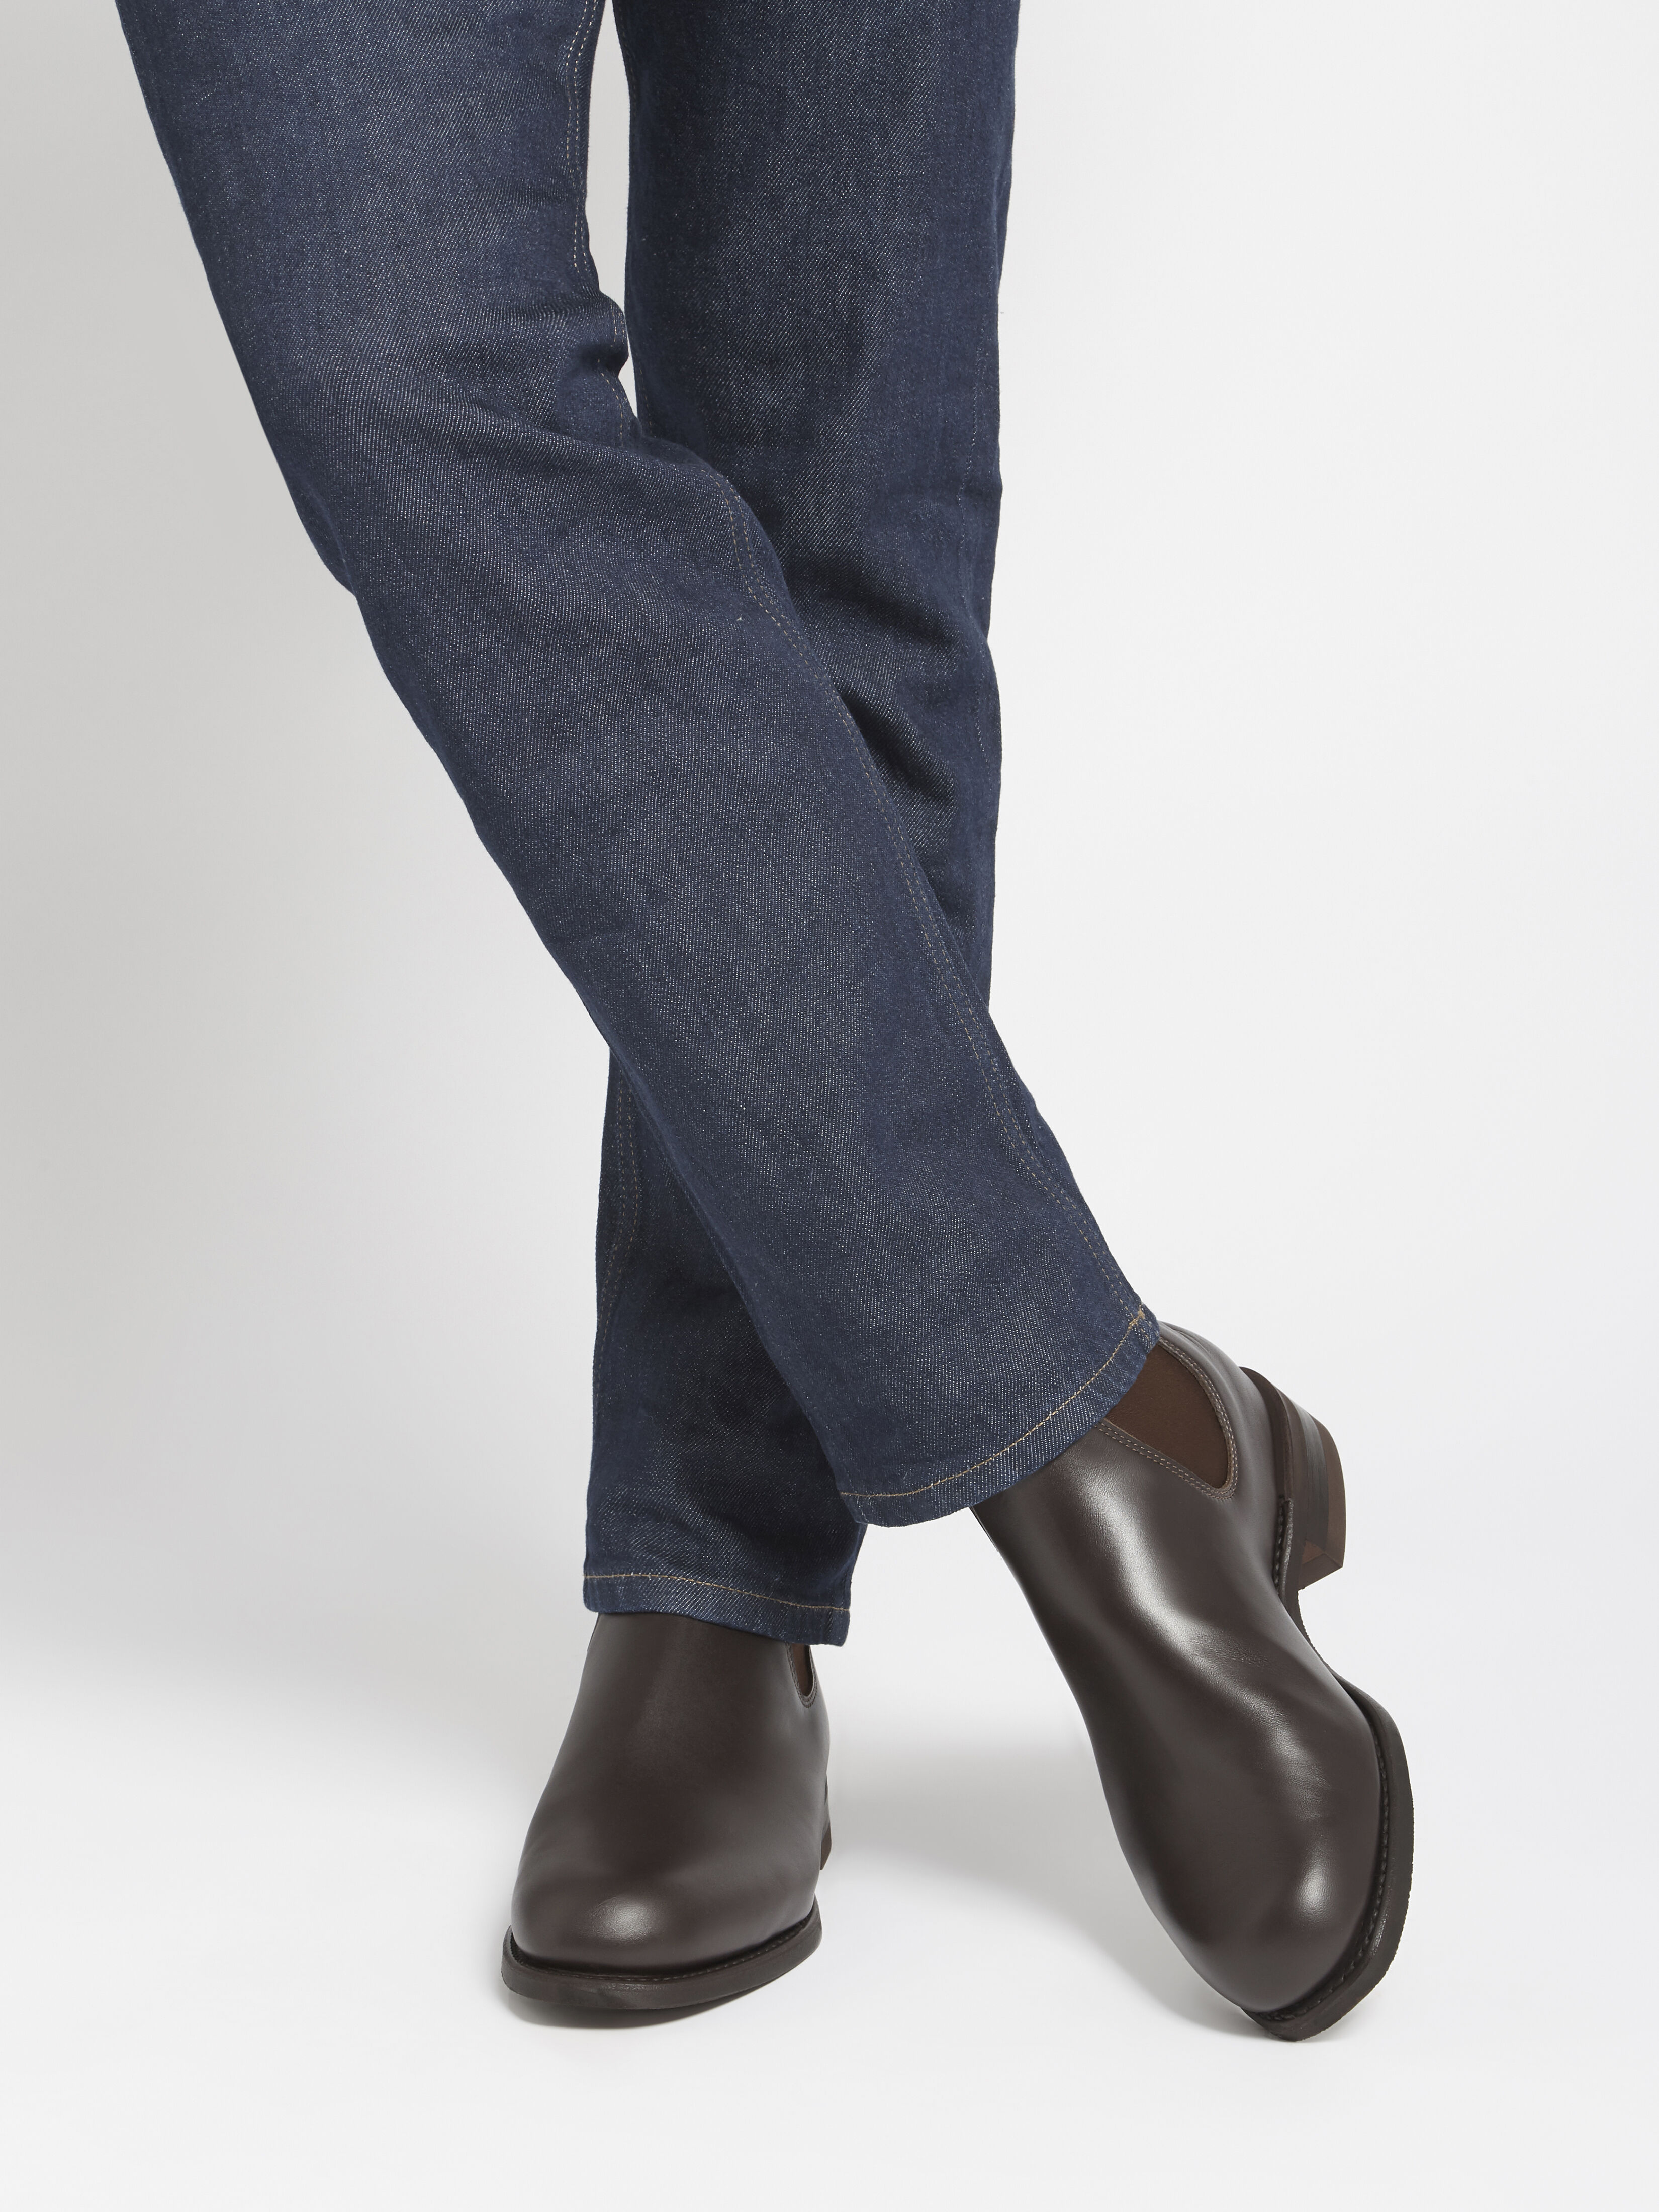 Comfort Turnout Boot - Classic Boots at 